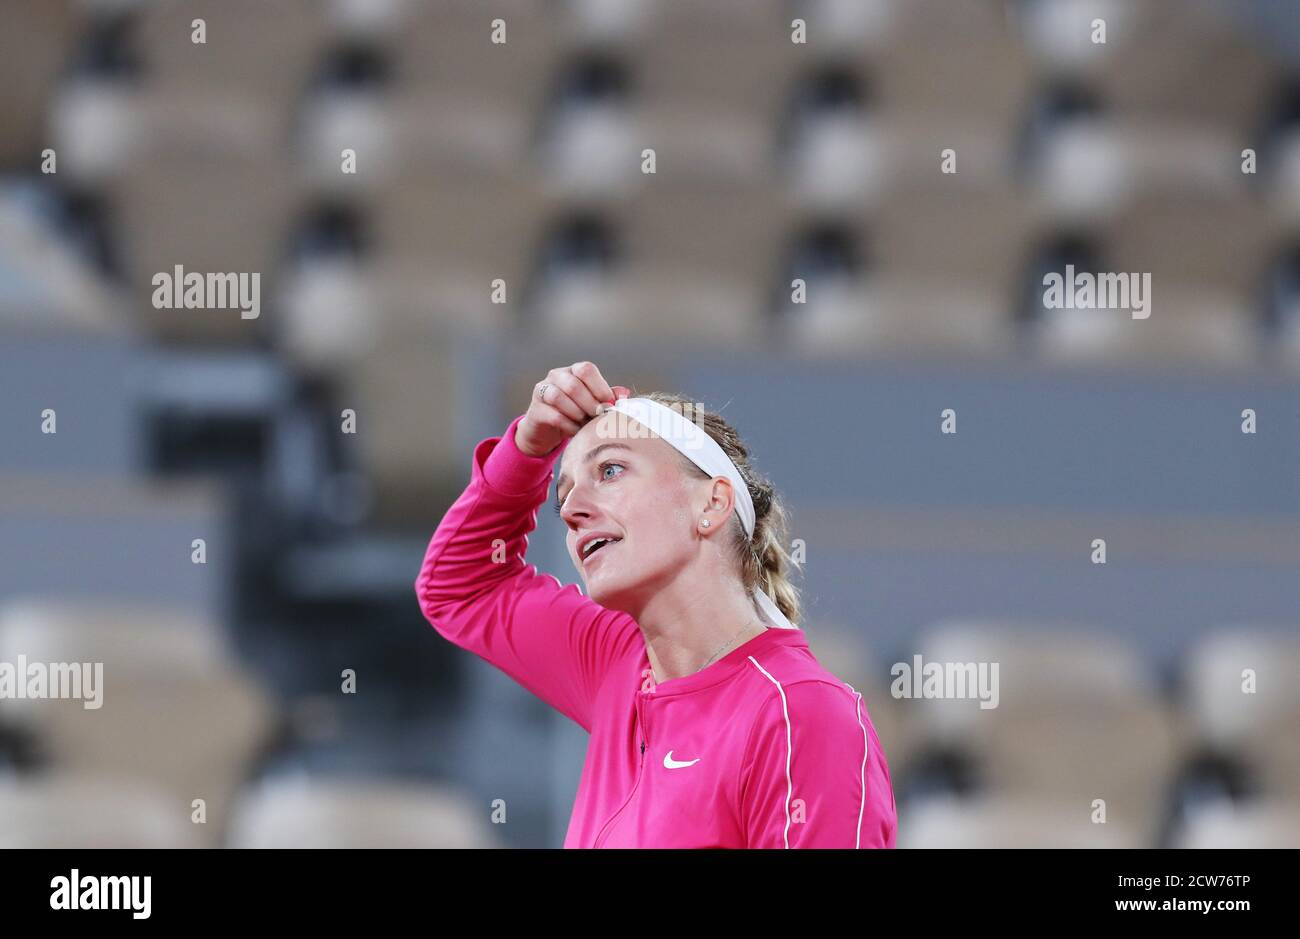 Paris, France. 28th Sep, 2020. Petra Kvitova of Czech Republic reacts after the women's singles first round match against Oceane Dodin of France at French Open tennis tournament 2020 at Roland Garros in Paris, France, Sept. 28, 2020. Credit: Gao Jing/Xinhua/Alamy Live News Stock Photo